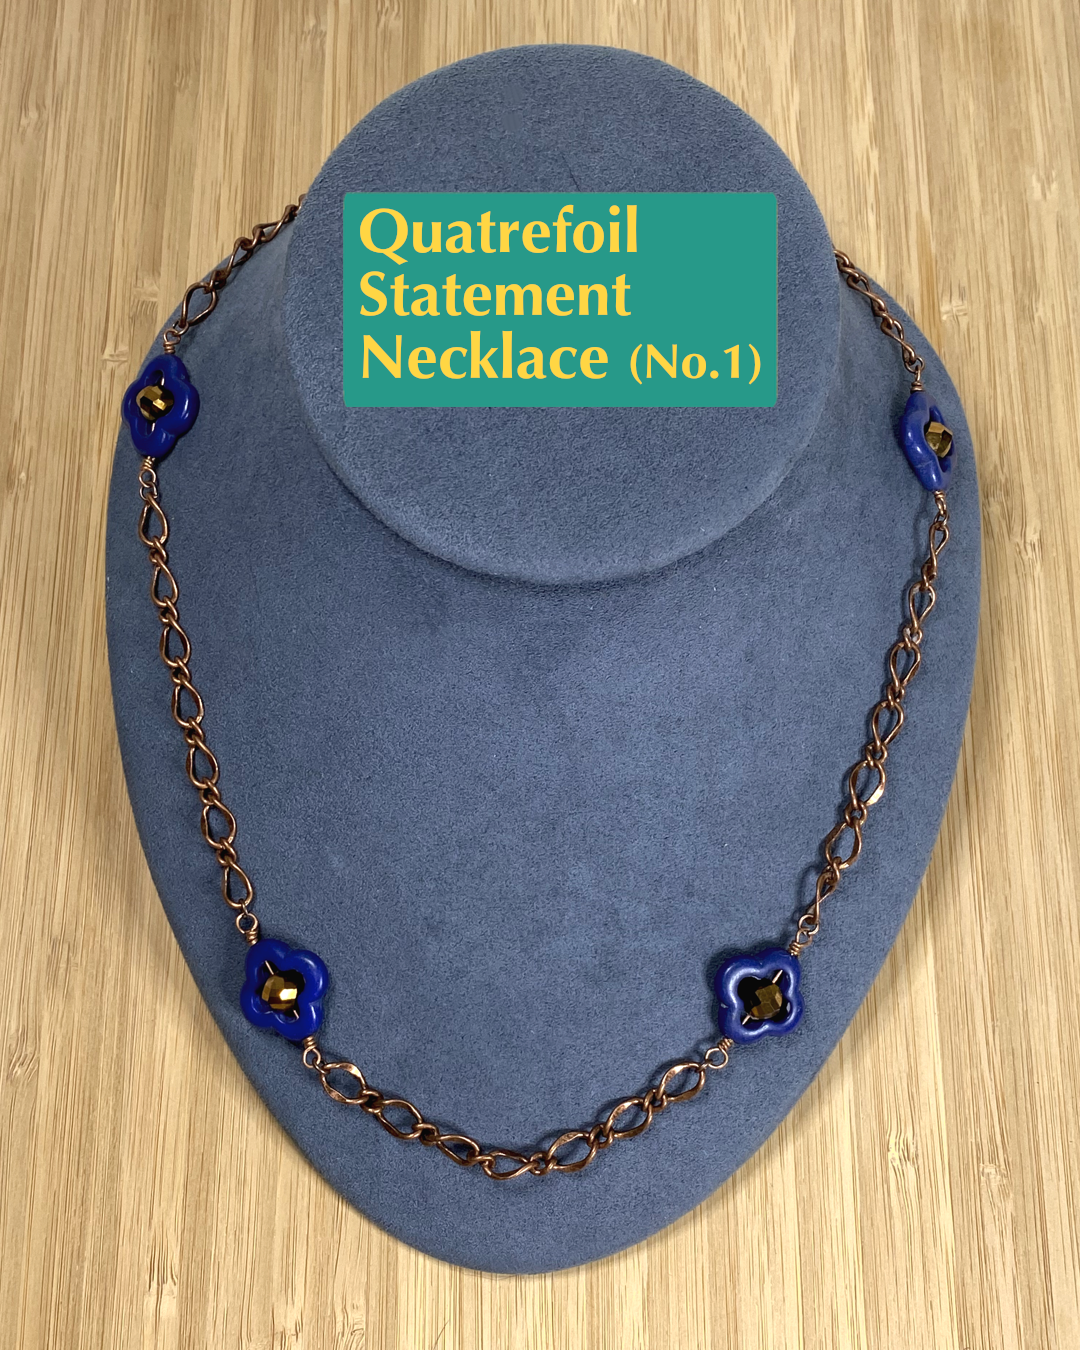 Handmade, wearable art copper necklace featuring blue and gold quatrefoil flowers with a toggle and clasp closure